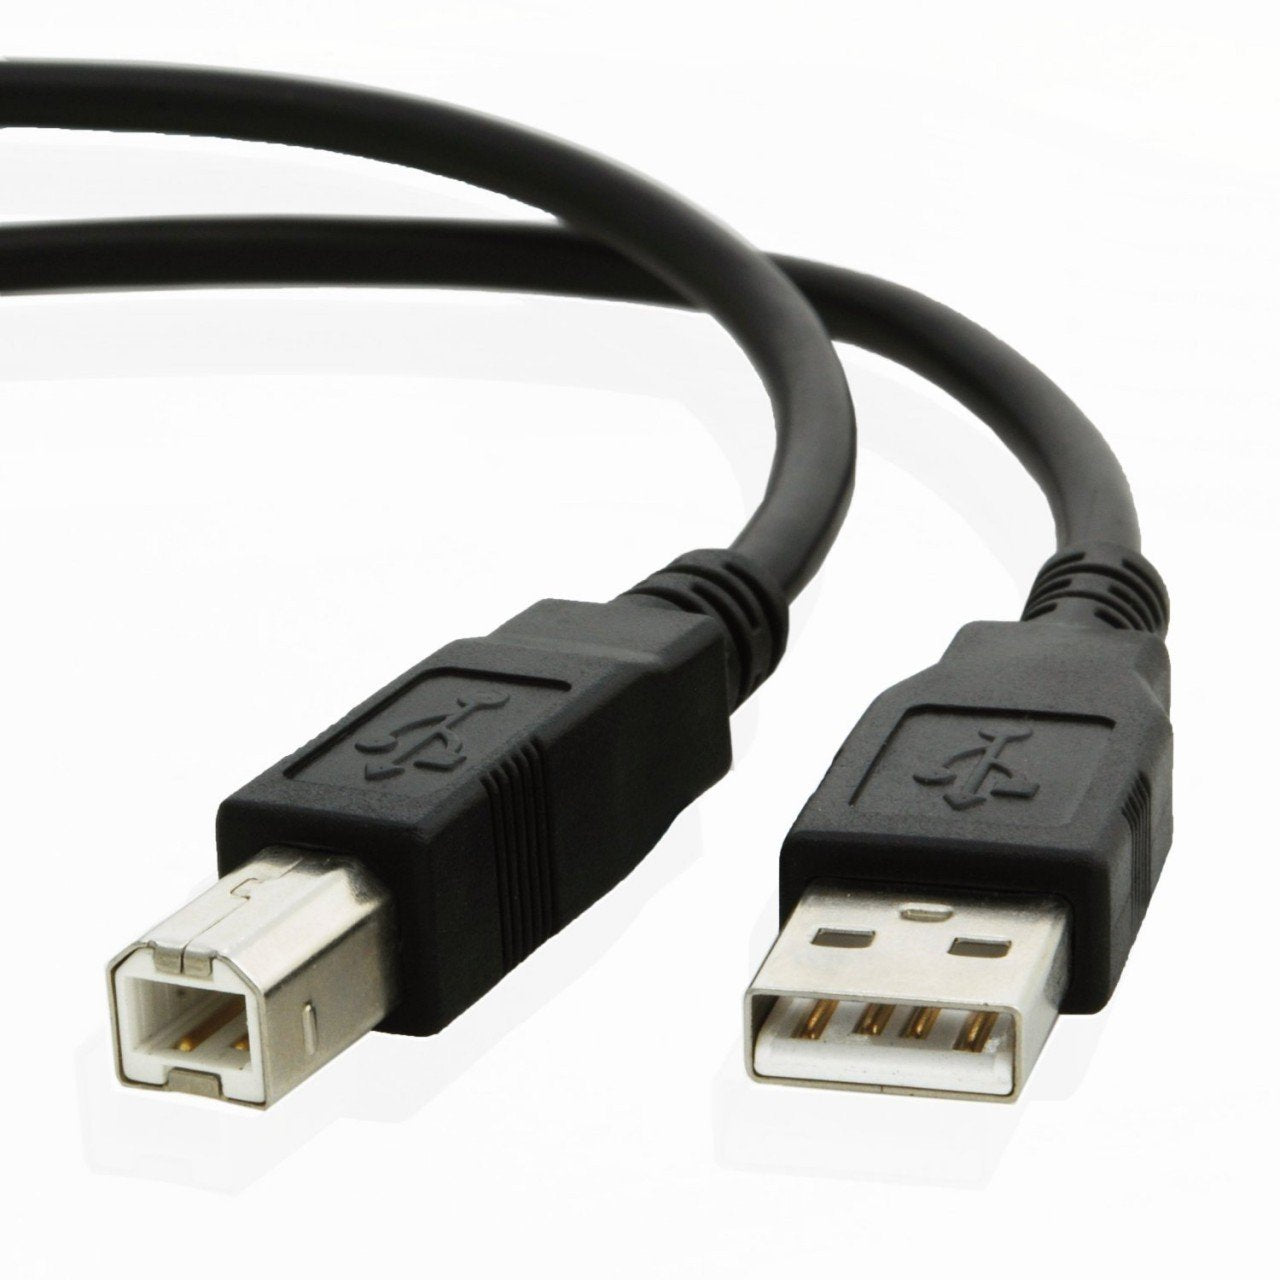 USB cable for Lexmark MS 811dtn